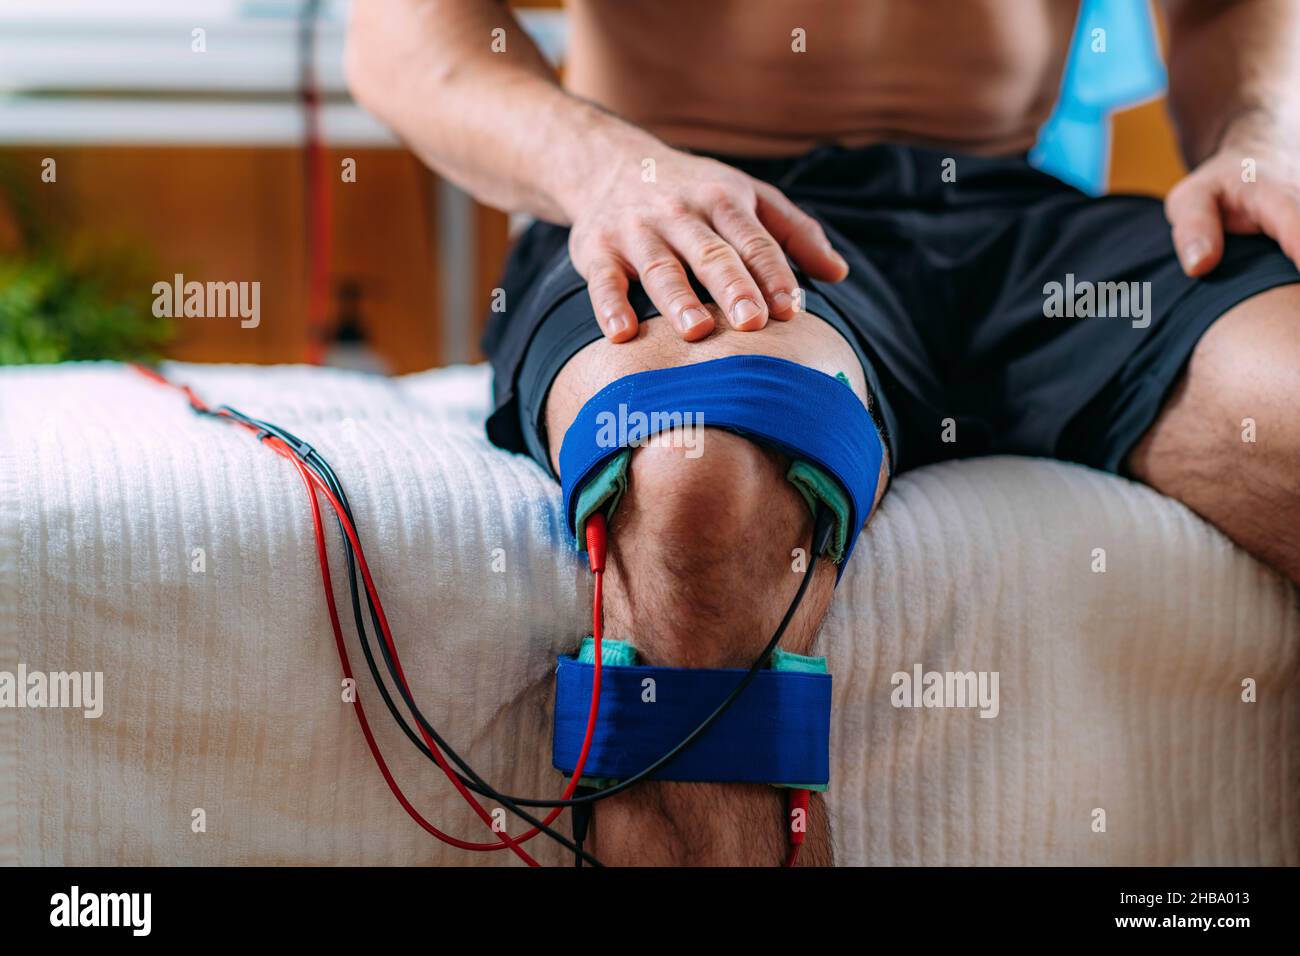 TENS (transcutaneous electrical nerve stimulation) knee physical therapy  Stock Photo - Alamy